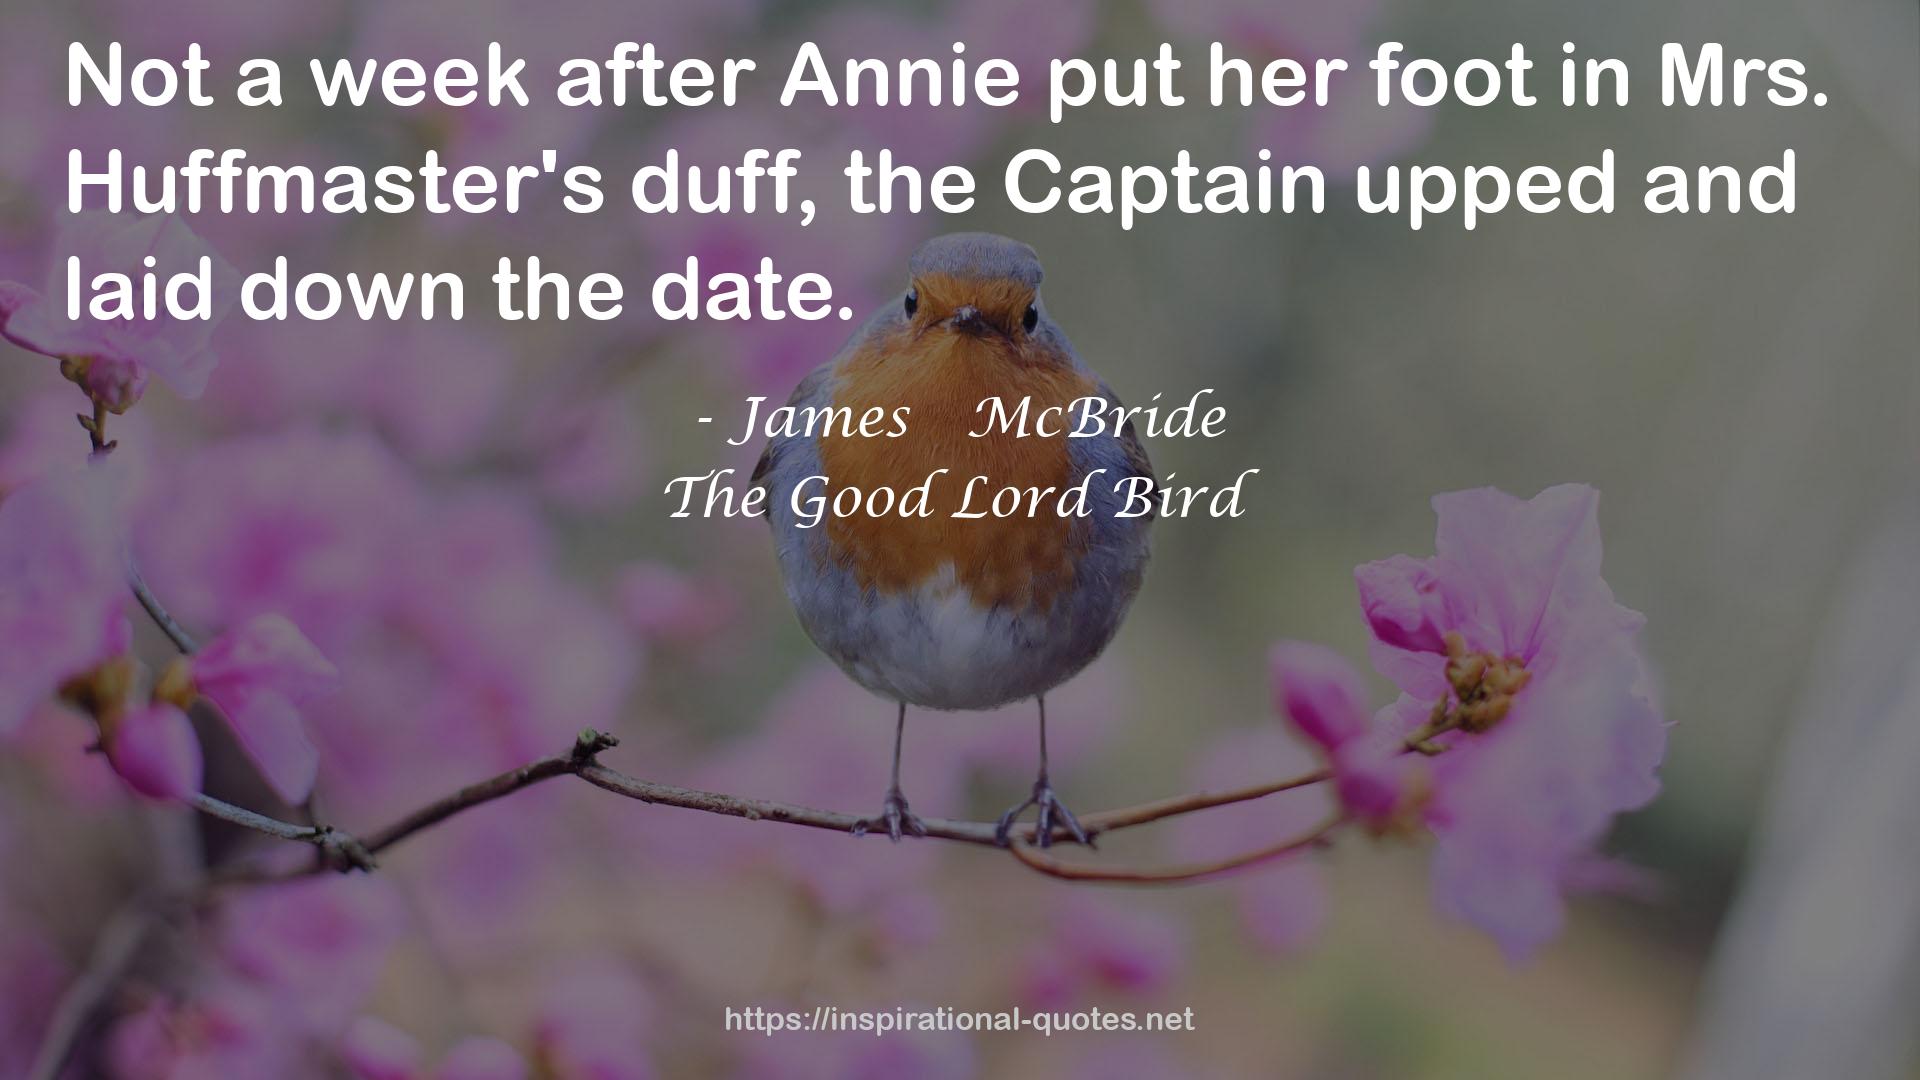 The Good Lord Bird QUOTES